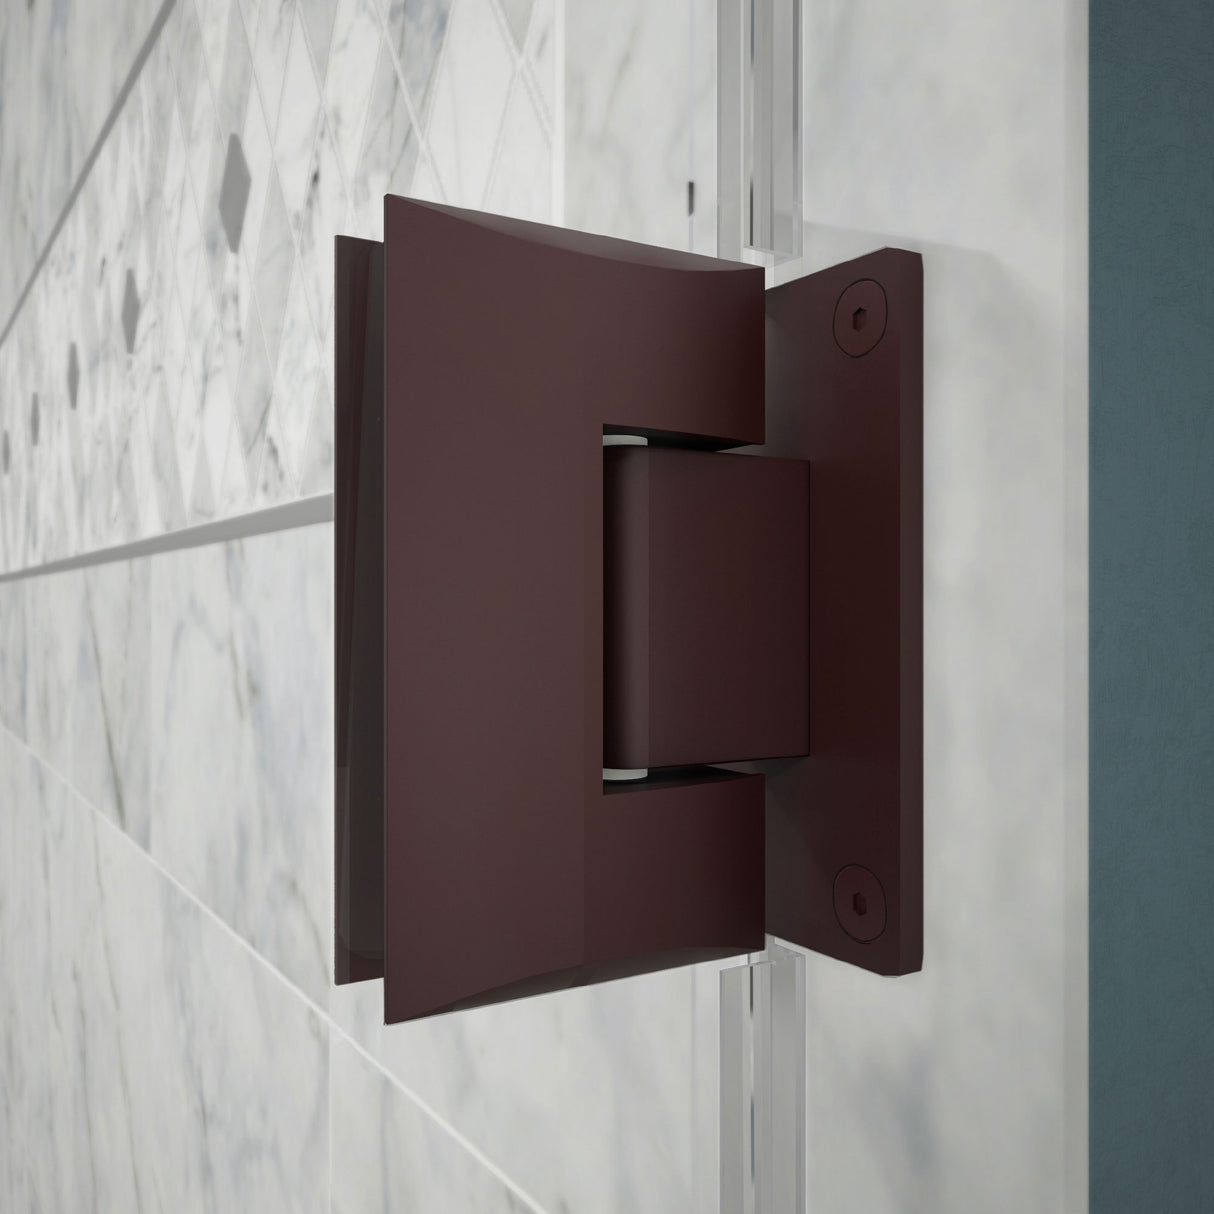 DreamLine Unidoor Plus 29 1/2 in. W x 34 3/8 in. D x 72 in. H Frameless Hinged Shower Enclosure in Oil Rubbed Bronze